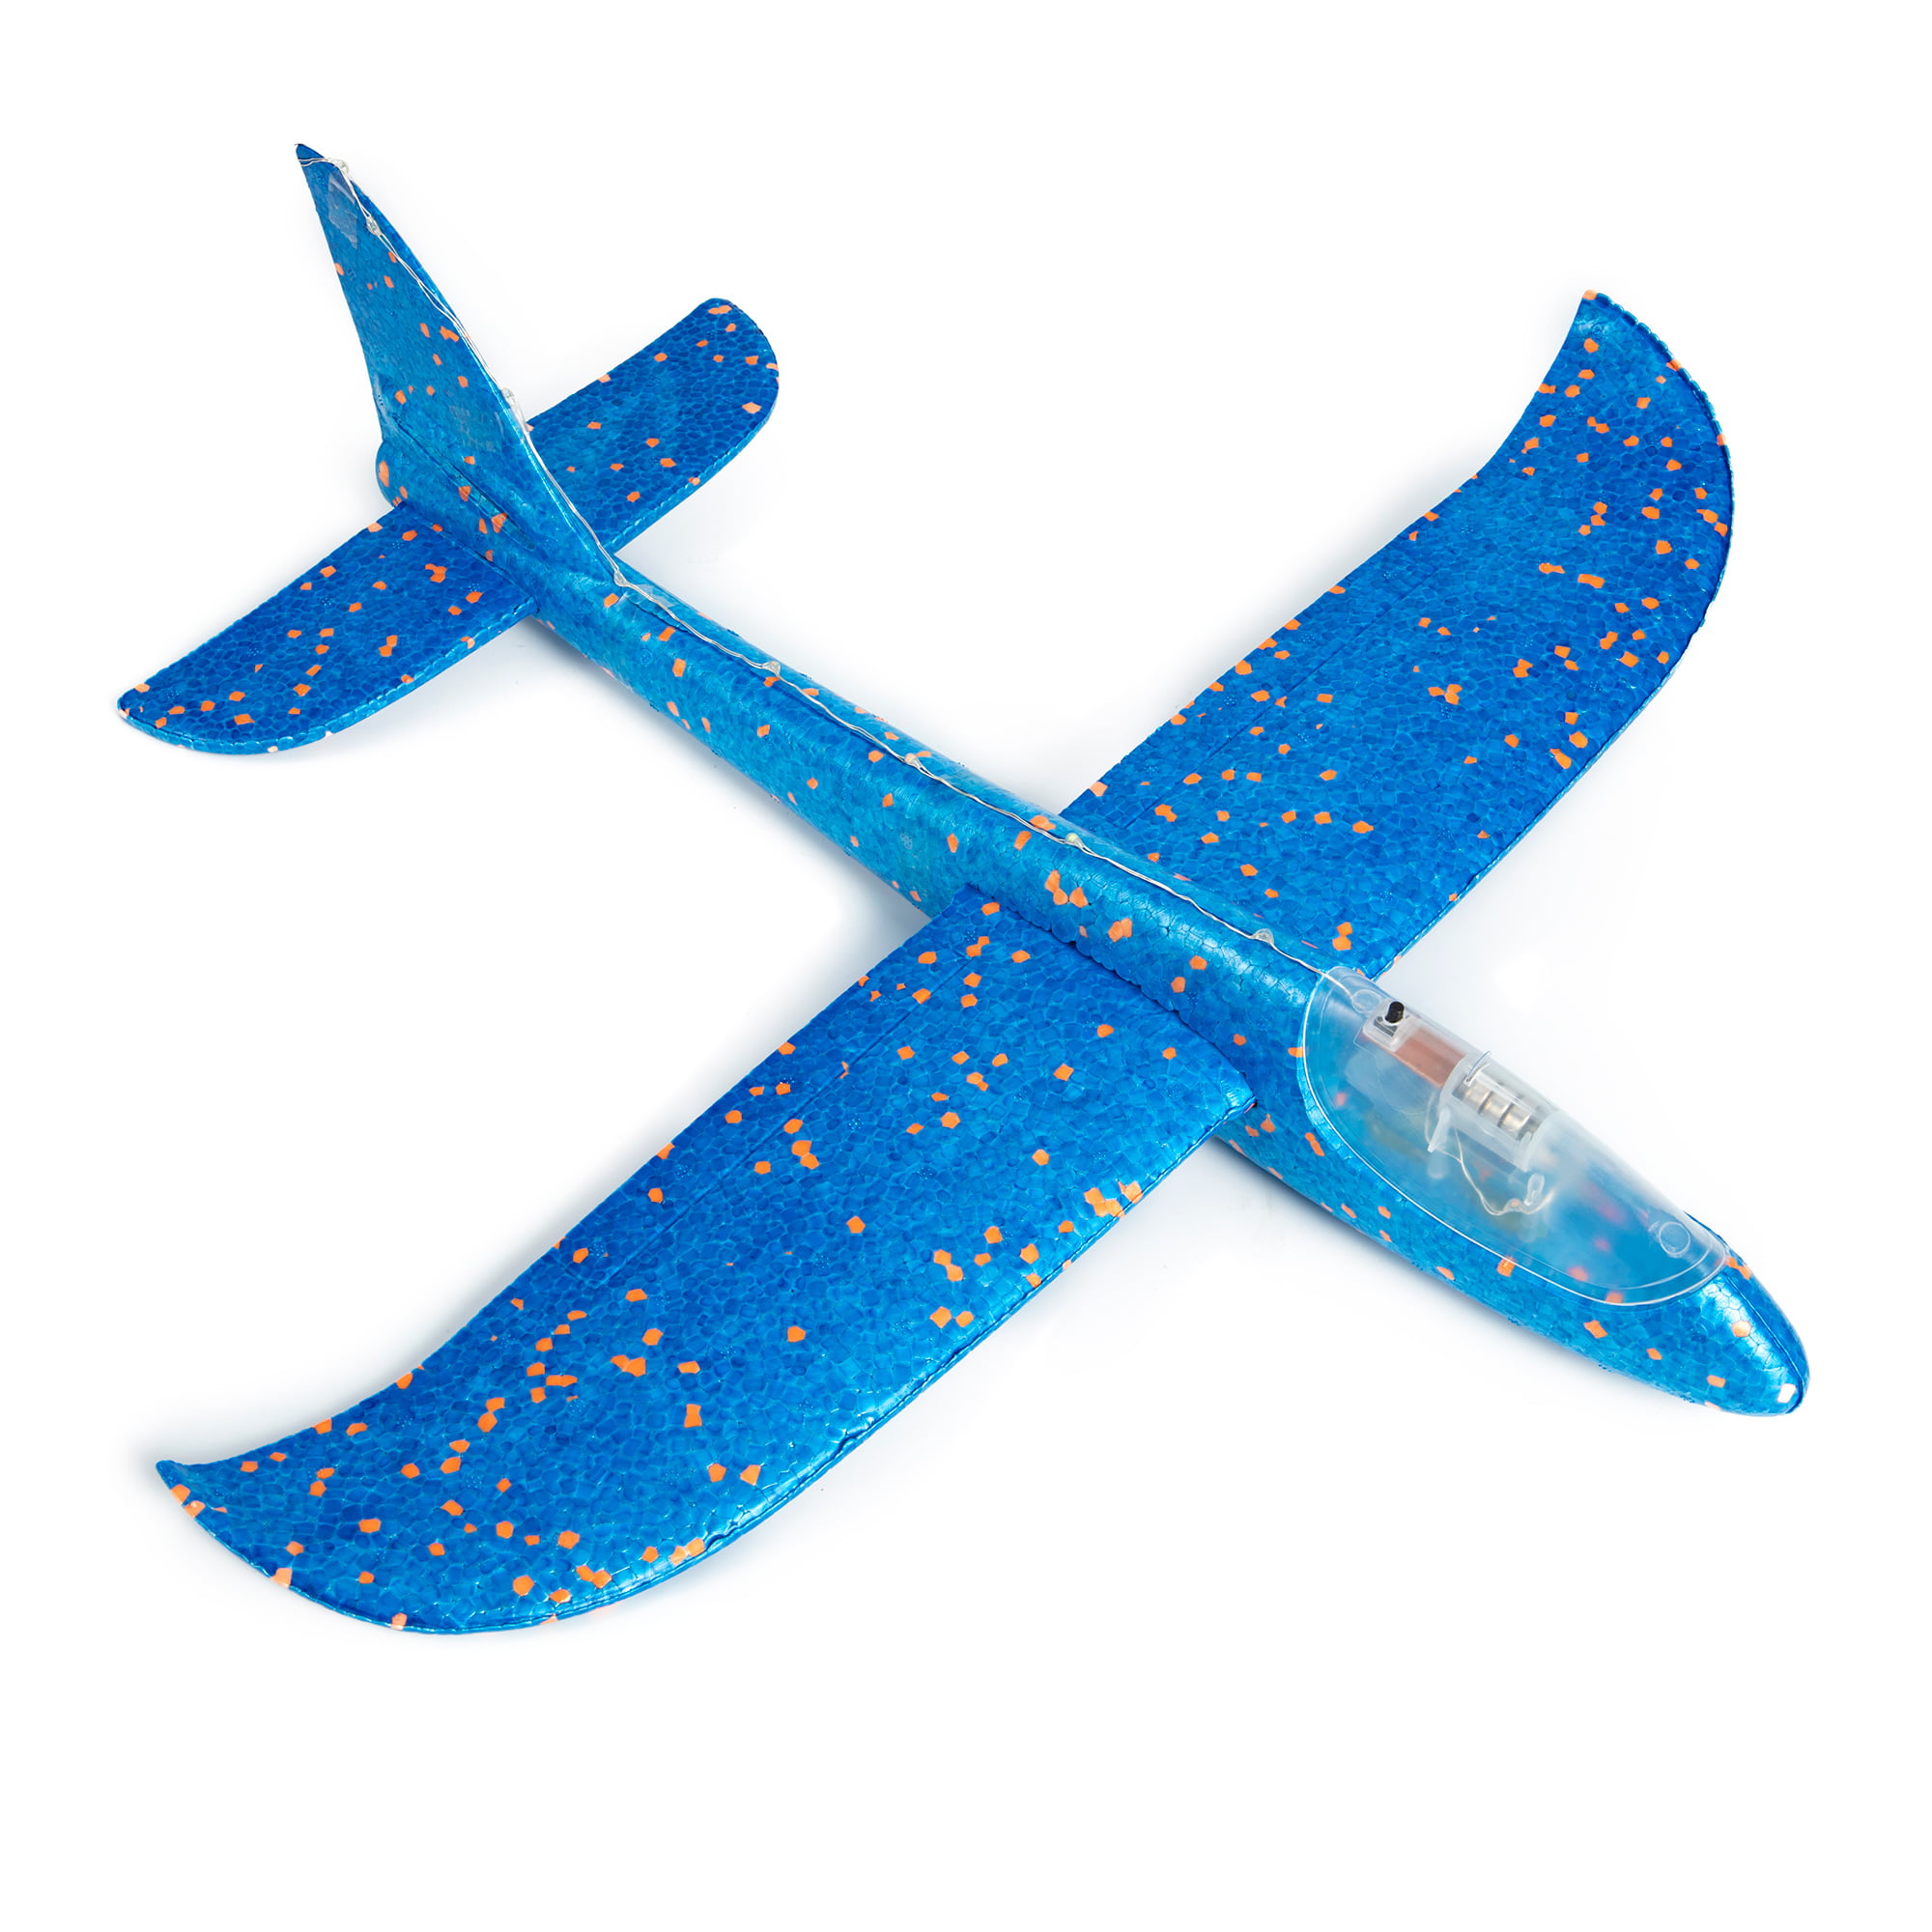 2Pcs EPP Foam Manual Throwing Glider Air Plane Flying Toy Stunt Version Children Educational Toy for Outdoor Toddler Children Boys Girls Gifts Throw Glider Toy Blue